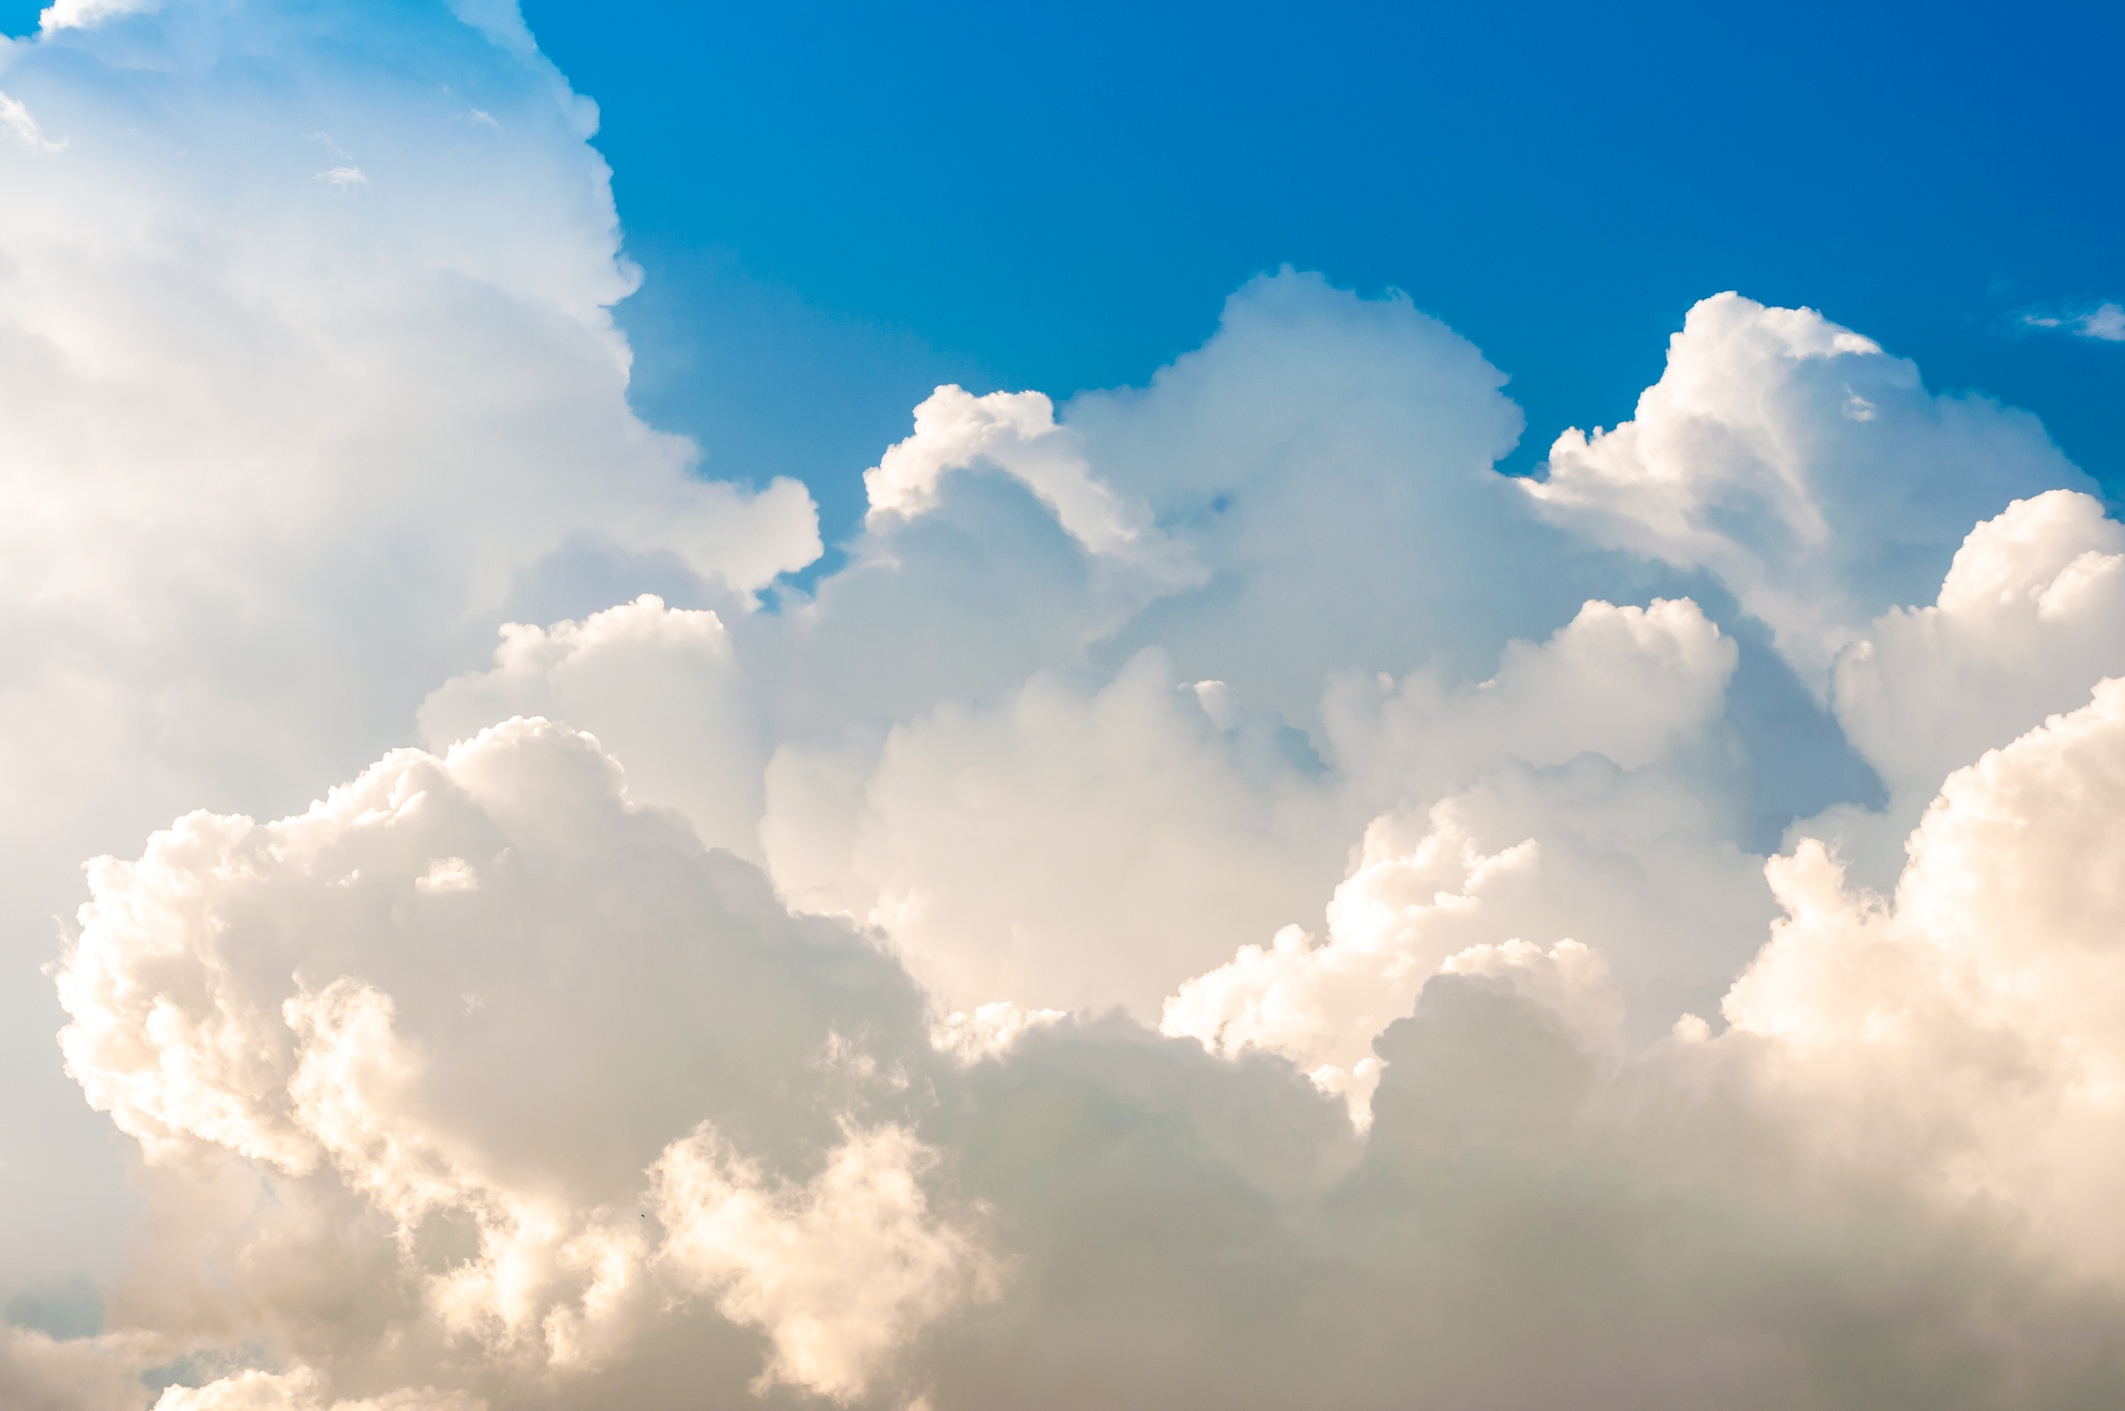 4 Considerations When Selecting the Right Cloud Provider